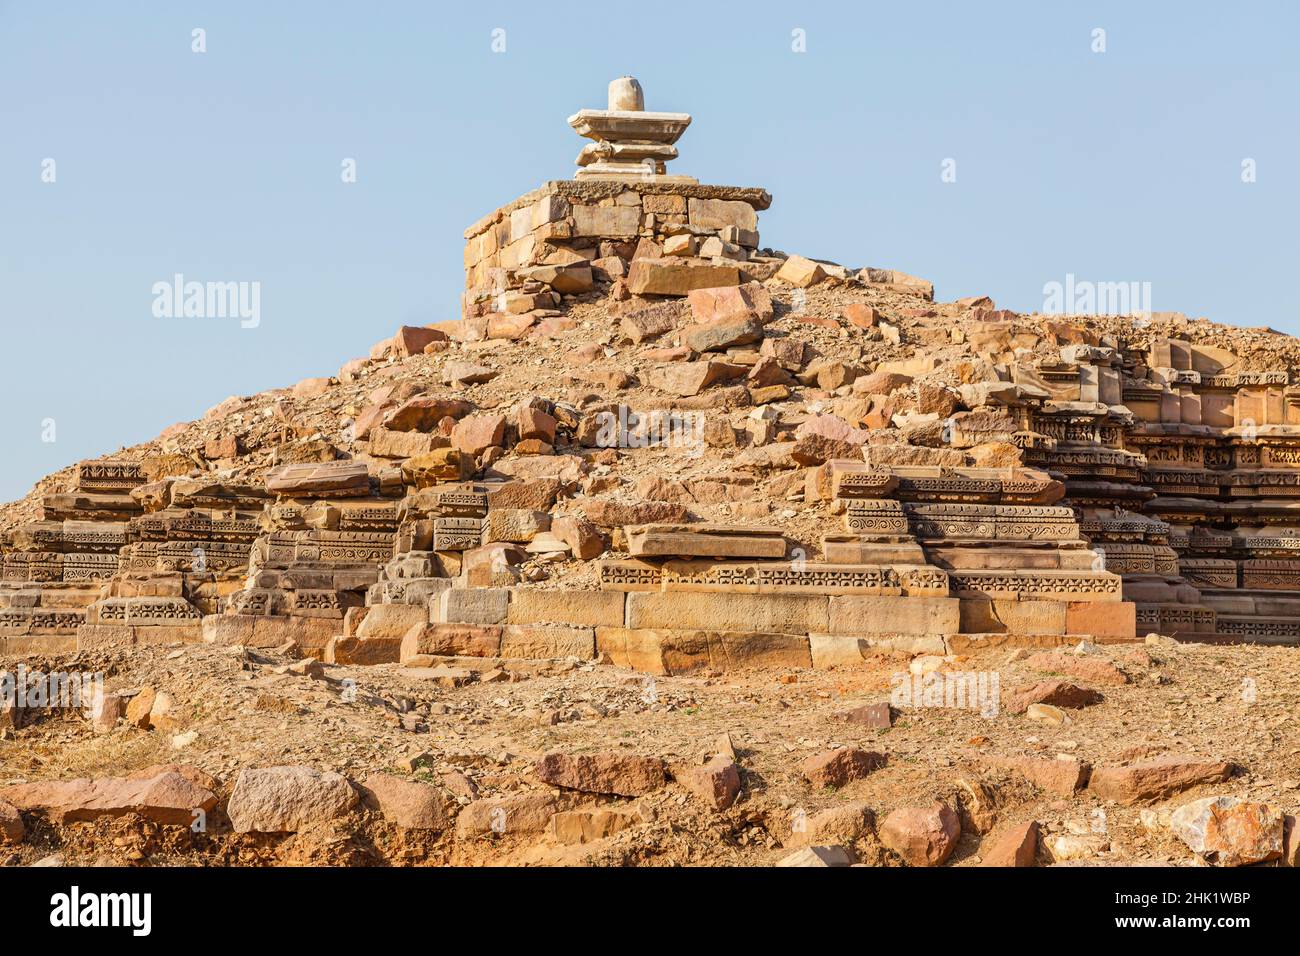 The crumbling remains of a ruined and unrestored temple in the Southern Group of Temples in Khajuraho, Madhya Pradesh, India Stock Photo